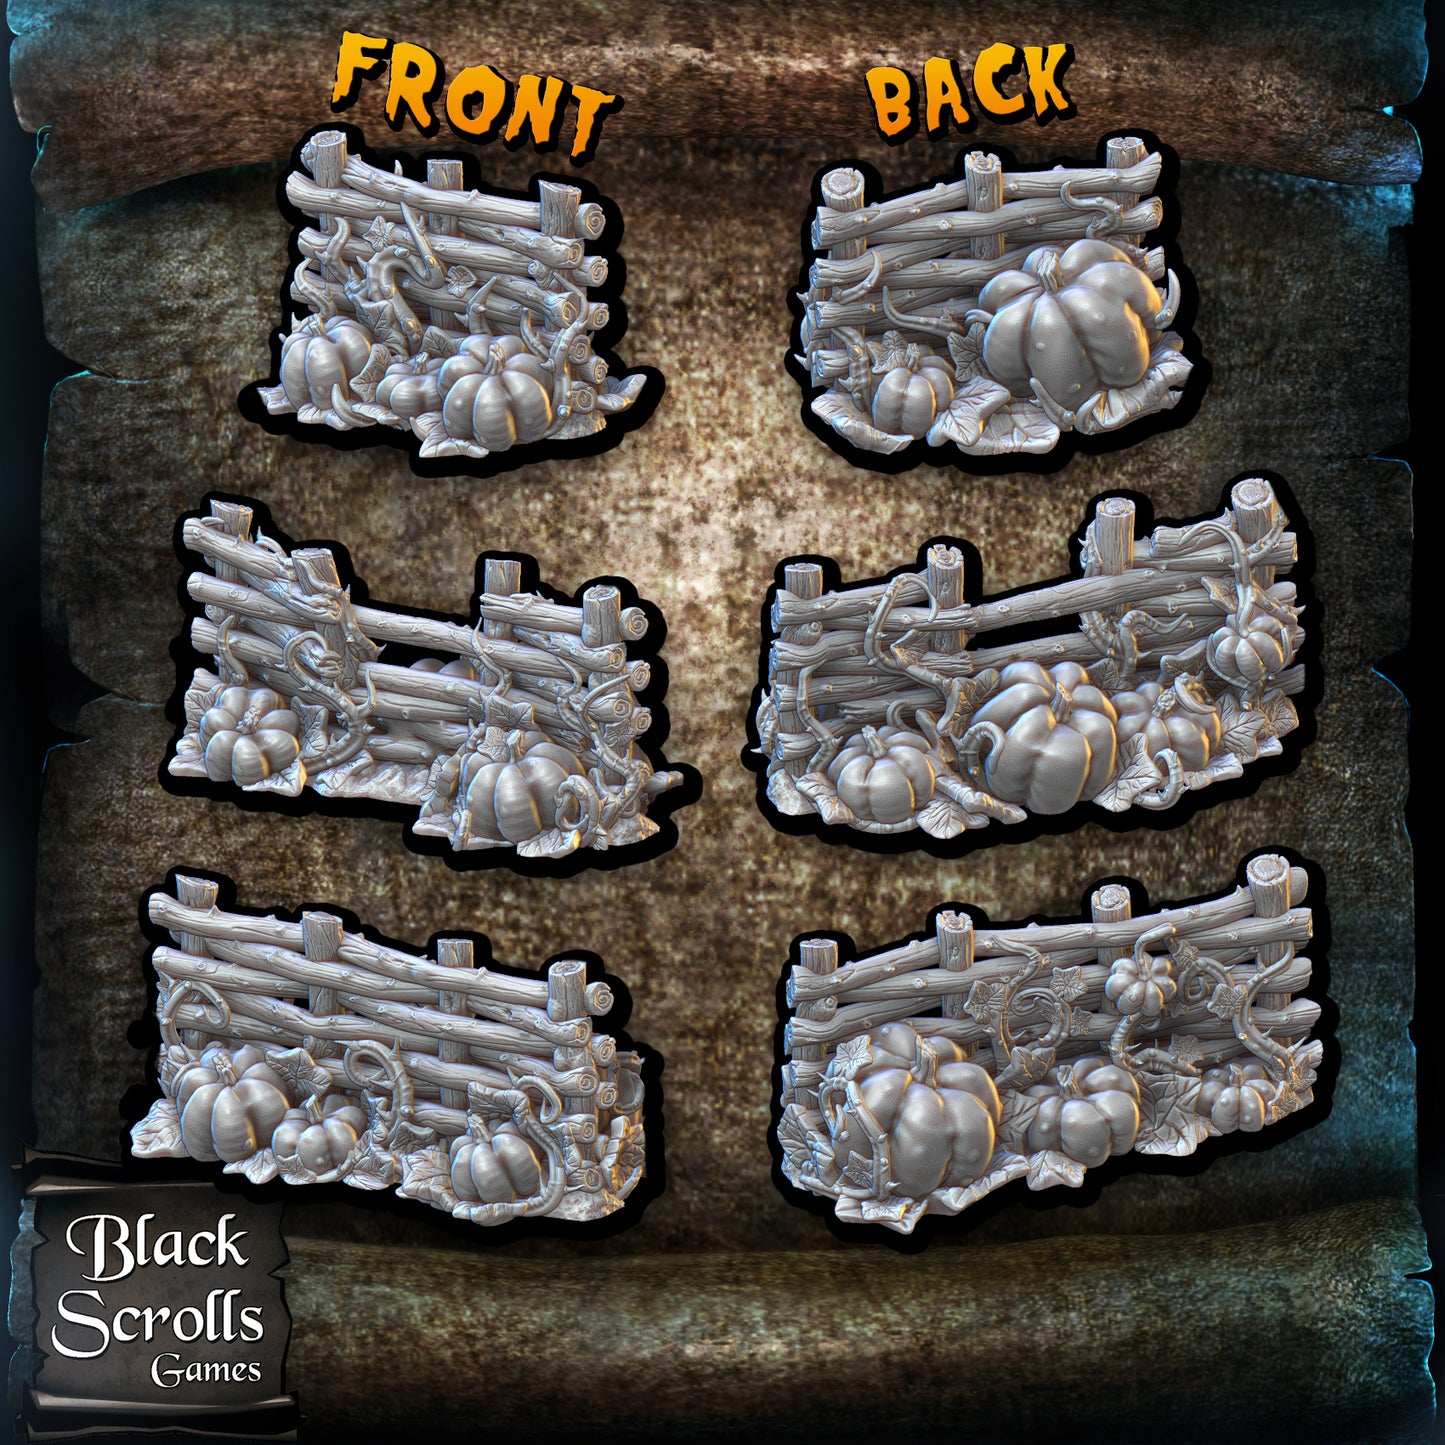 Wicker fences and stone walls from City of Tarok for RPGs, board games, painters and collectors